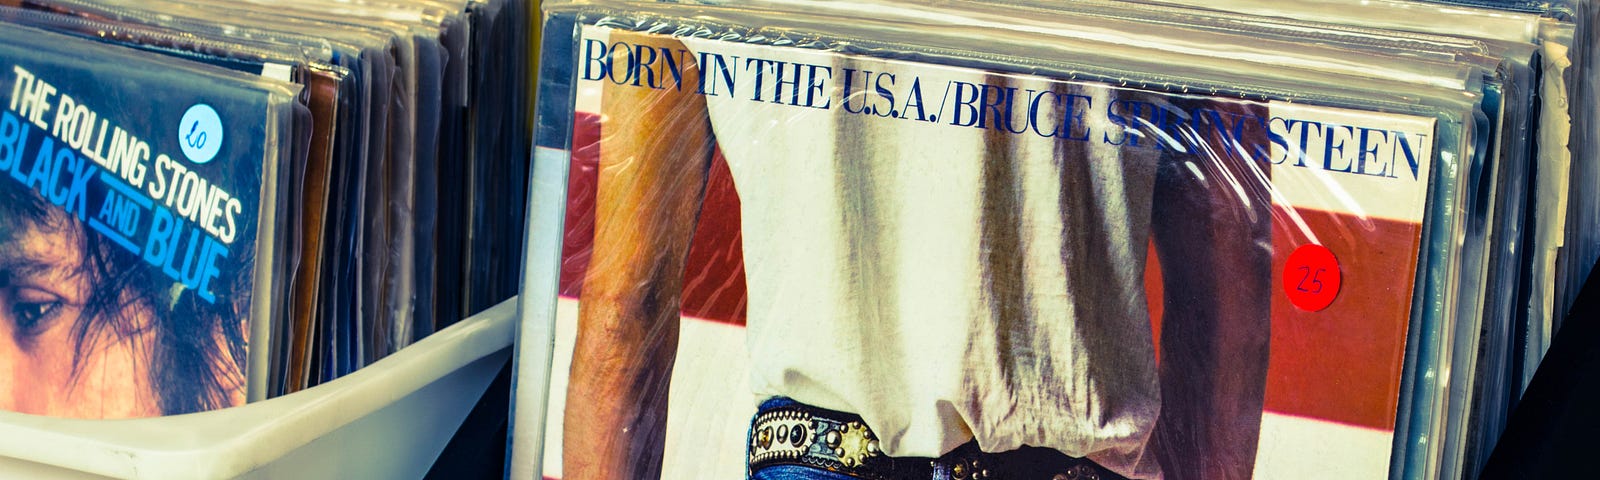 Picture of a Bruce Springsteen “Born in the U.S.A.” LP record in a record bin.